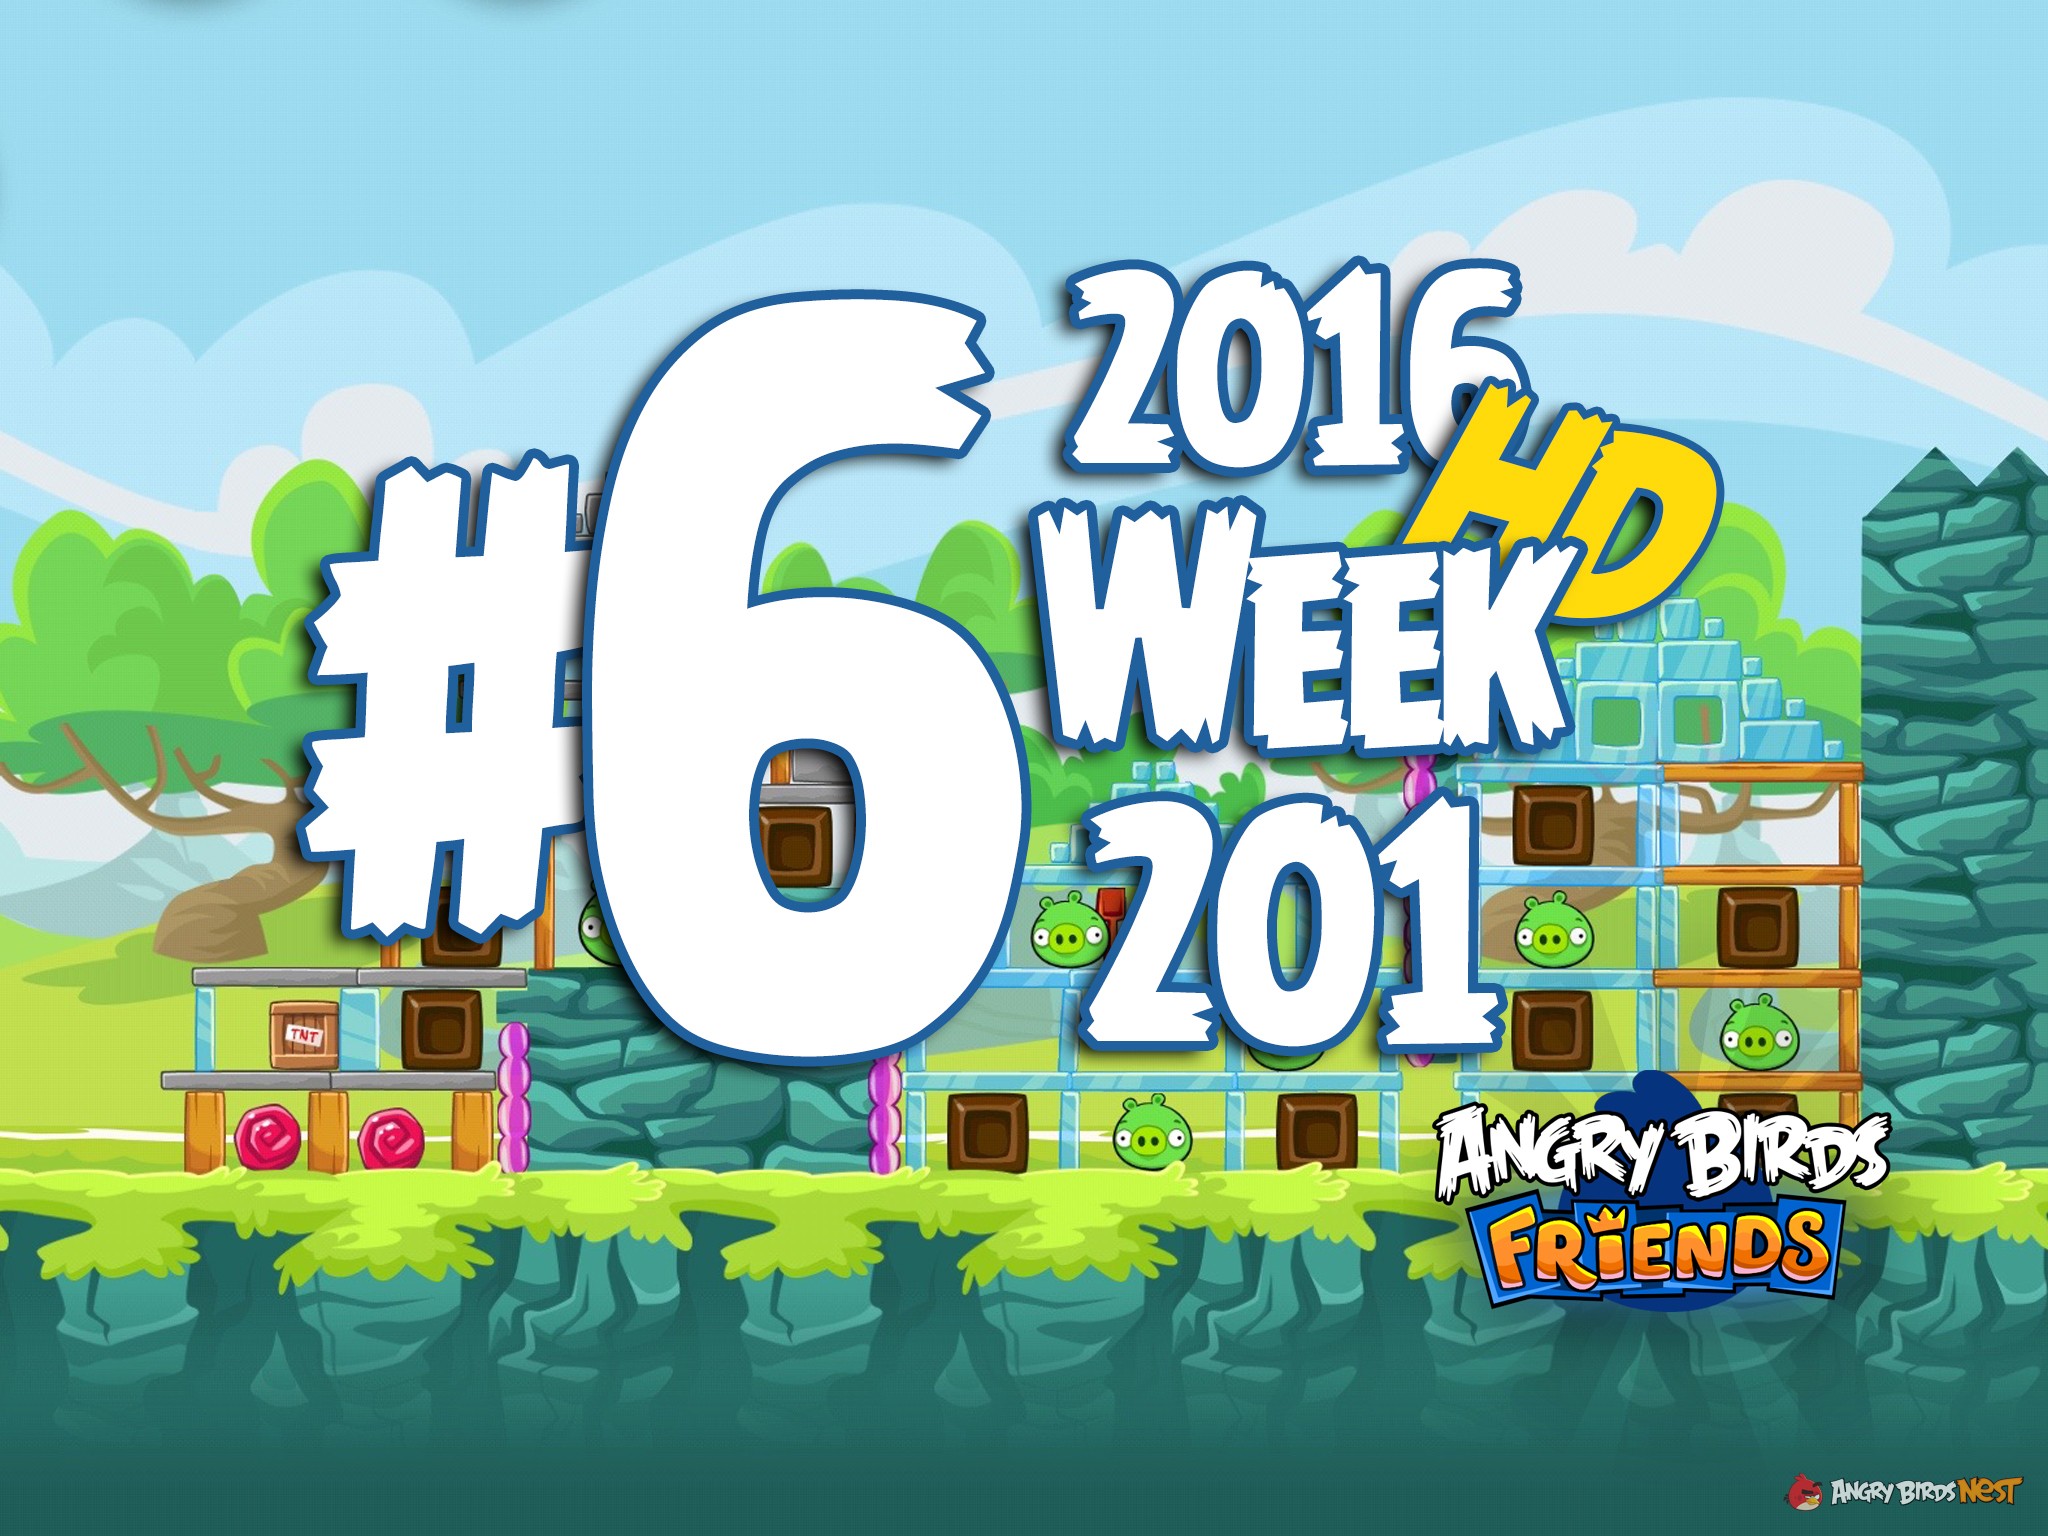 Angry Birds Friends Week 201 Level 6